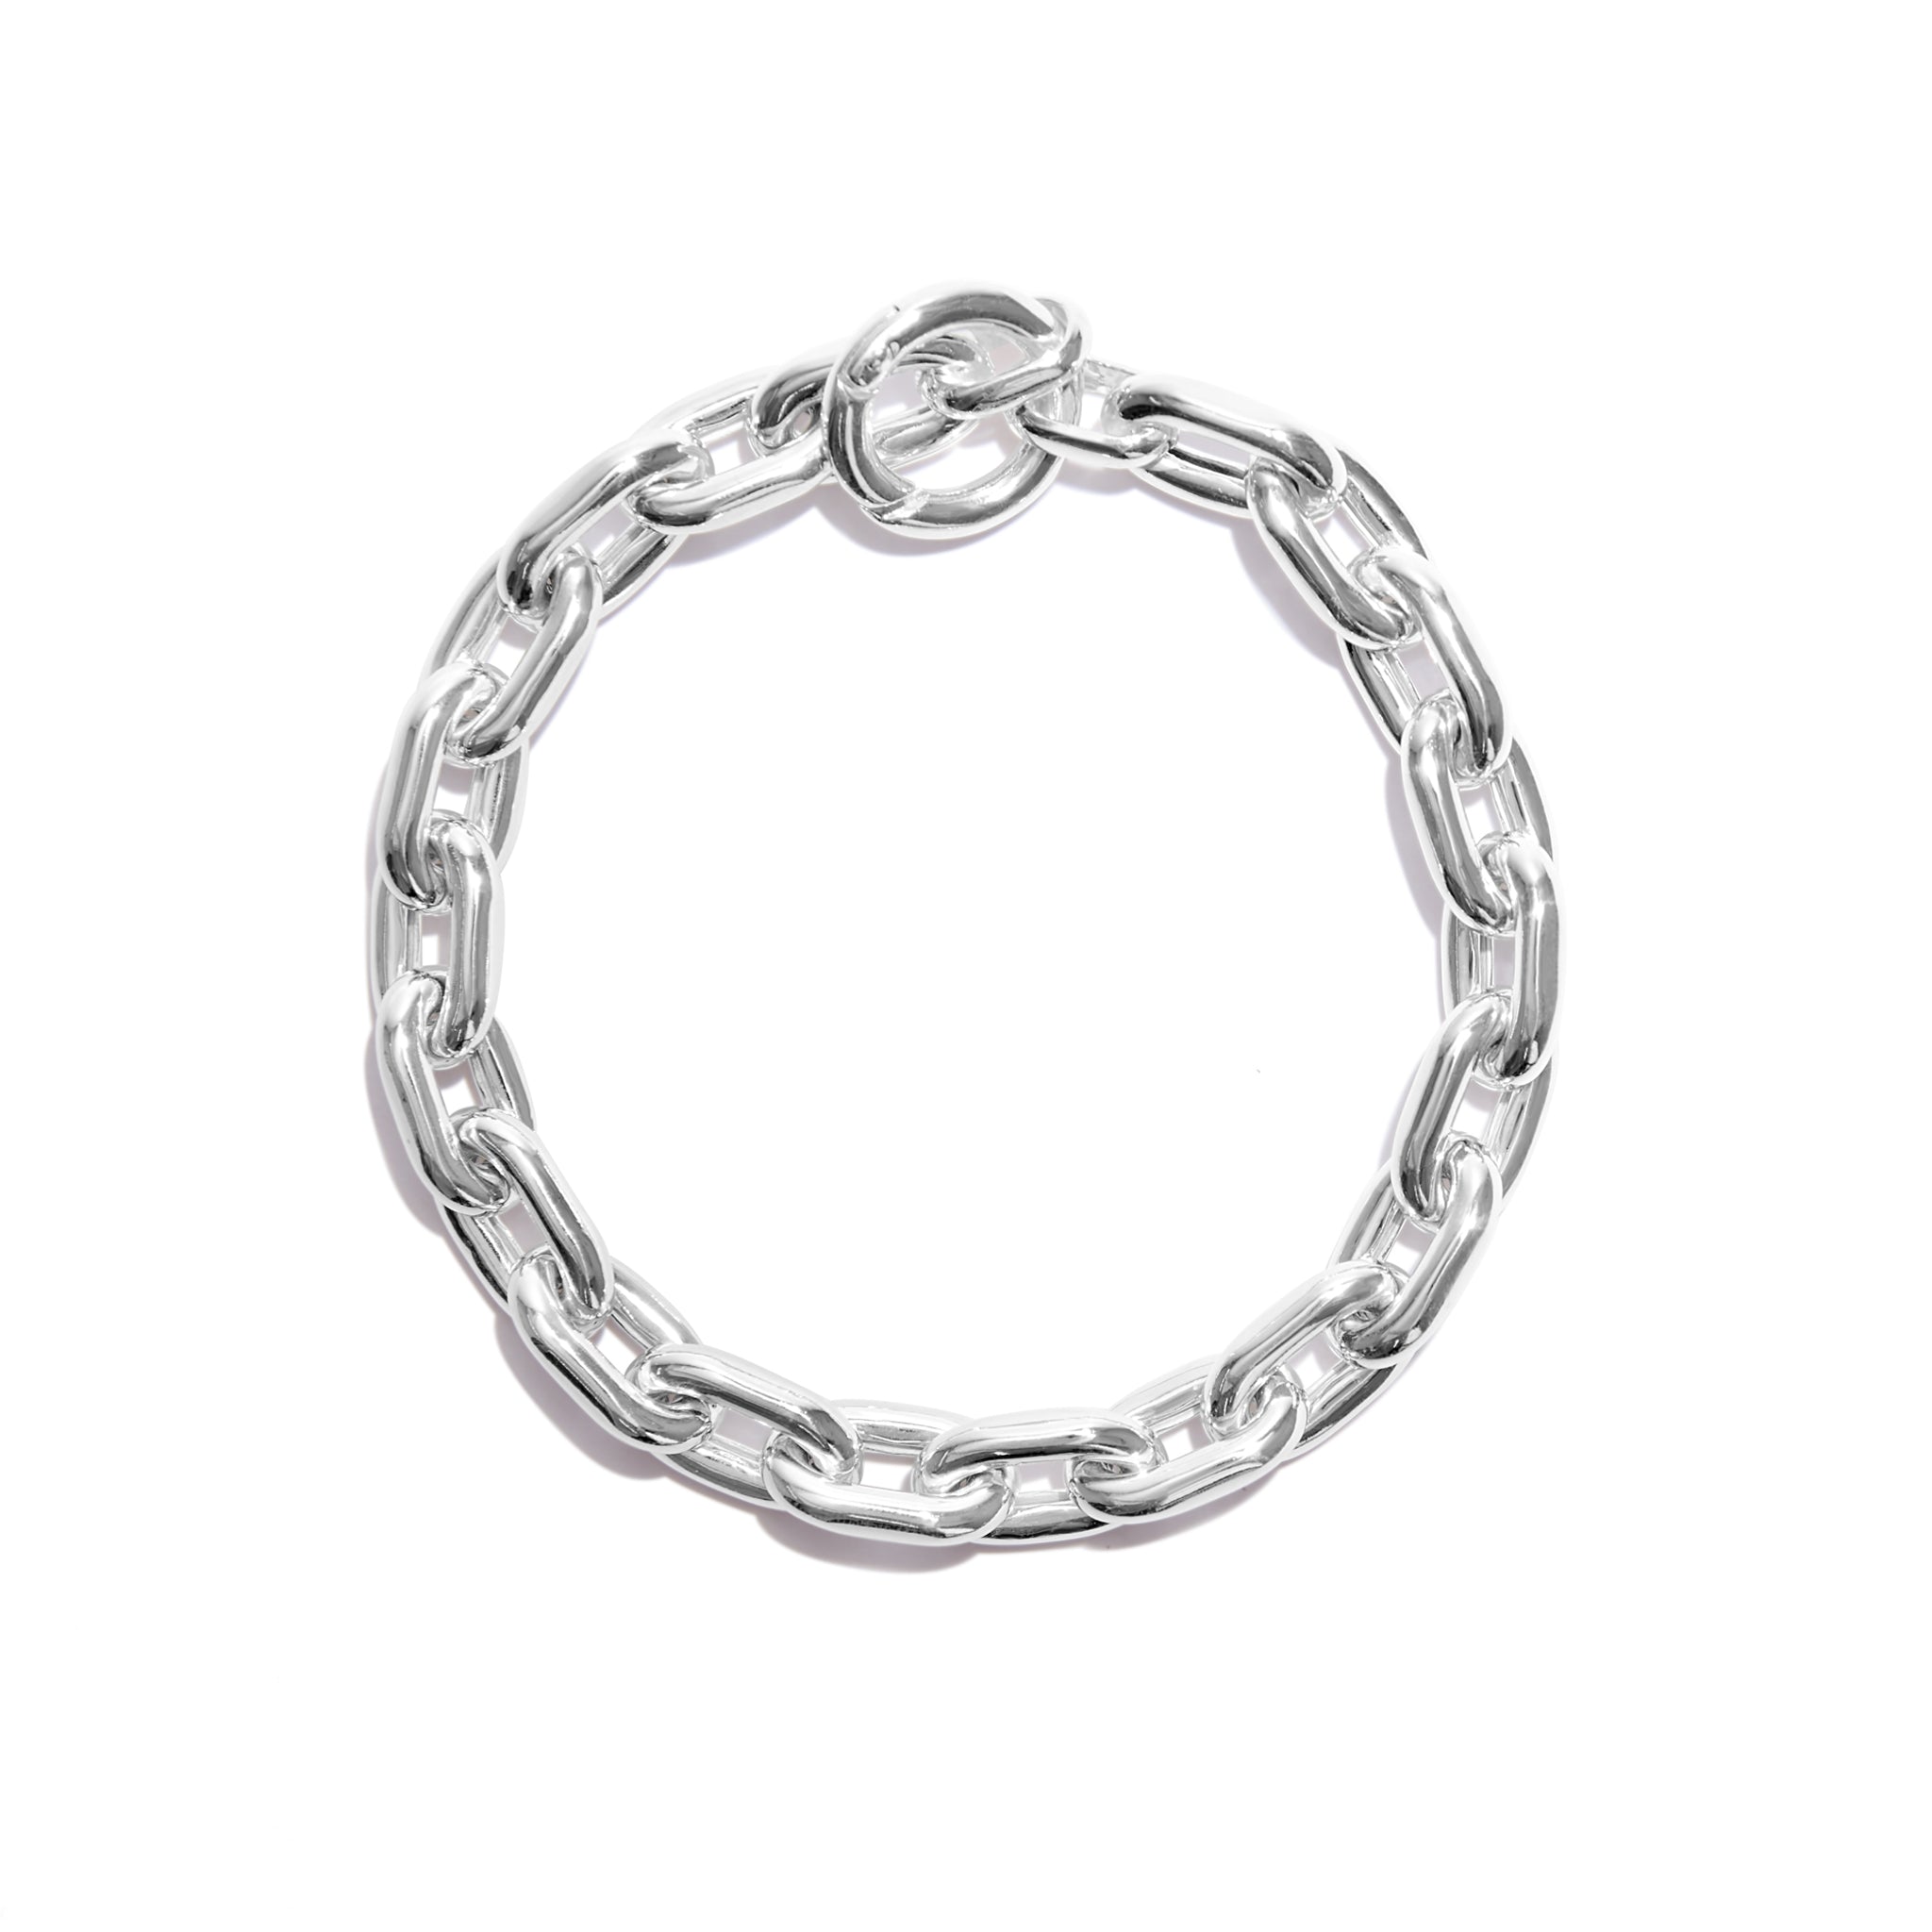 This sterling silver Tube Link Bracelet is an elegant statement piece. Its hollow tube link design gives it a modern minimal look that can dress up any outfit. An ideal piece for everyday wear, it adds just the right touch of spontaneity and sophistication.